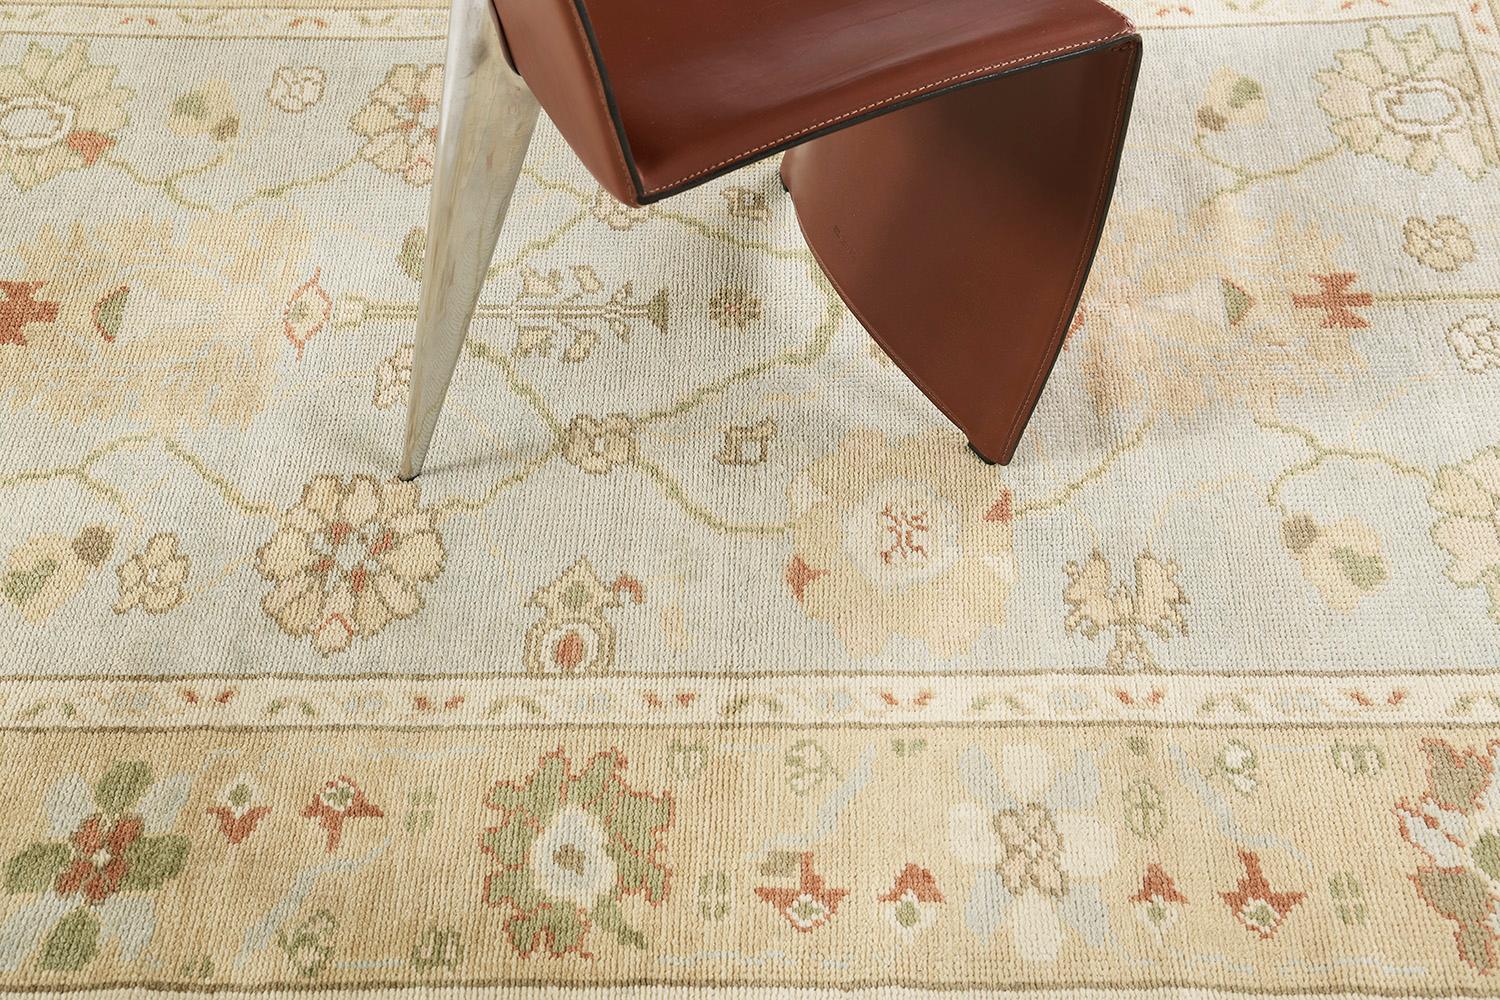 A poised Oushak revival rug that is a magnificent impression of sophistication and soft beauty. Distinctive palmettes, graceful peonies and florid patterns are showcasing refined elegance in the remarkable shades of khaki, sand, ivory, sky blue and